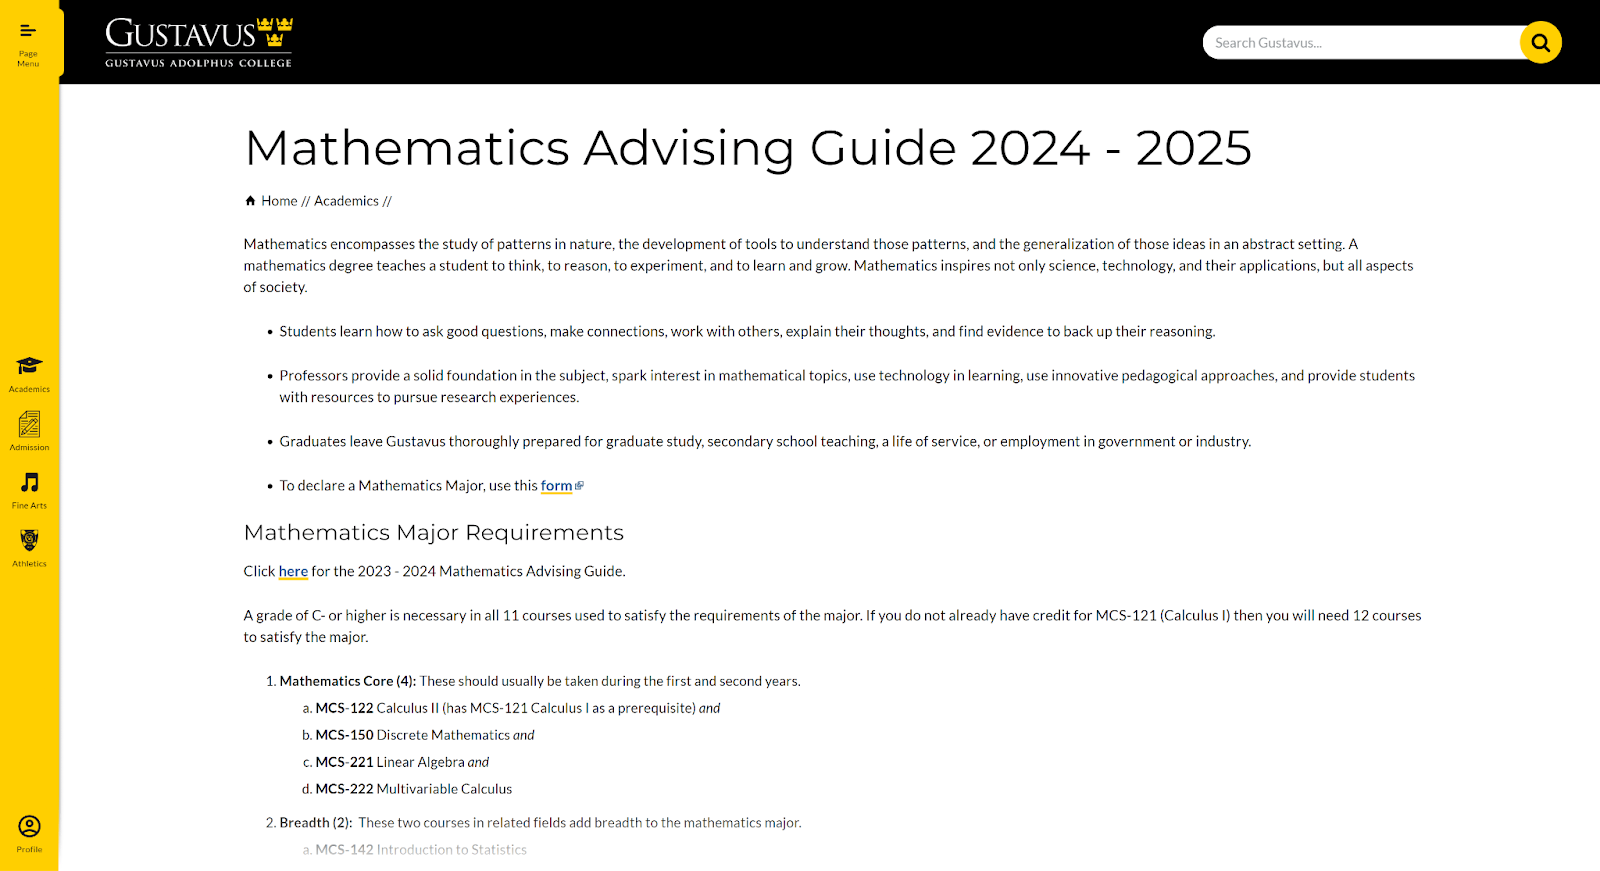 Mathematics Advising Guide published by Gustavus Adolphus College.